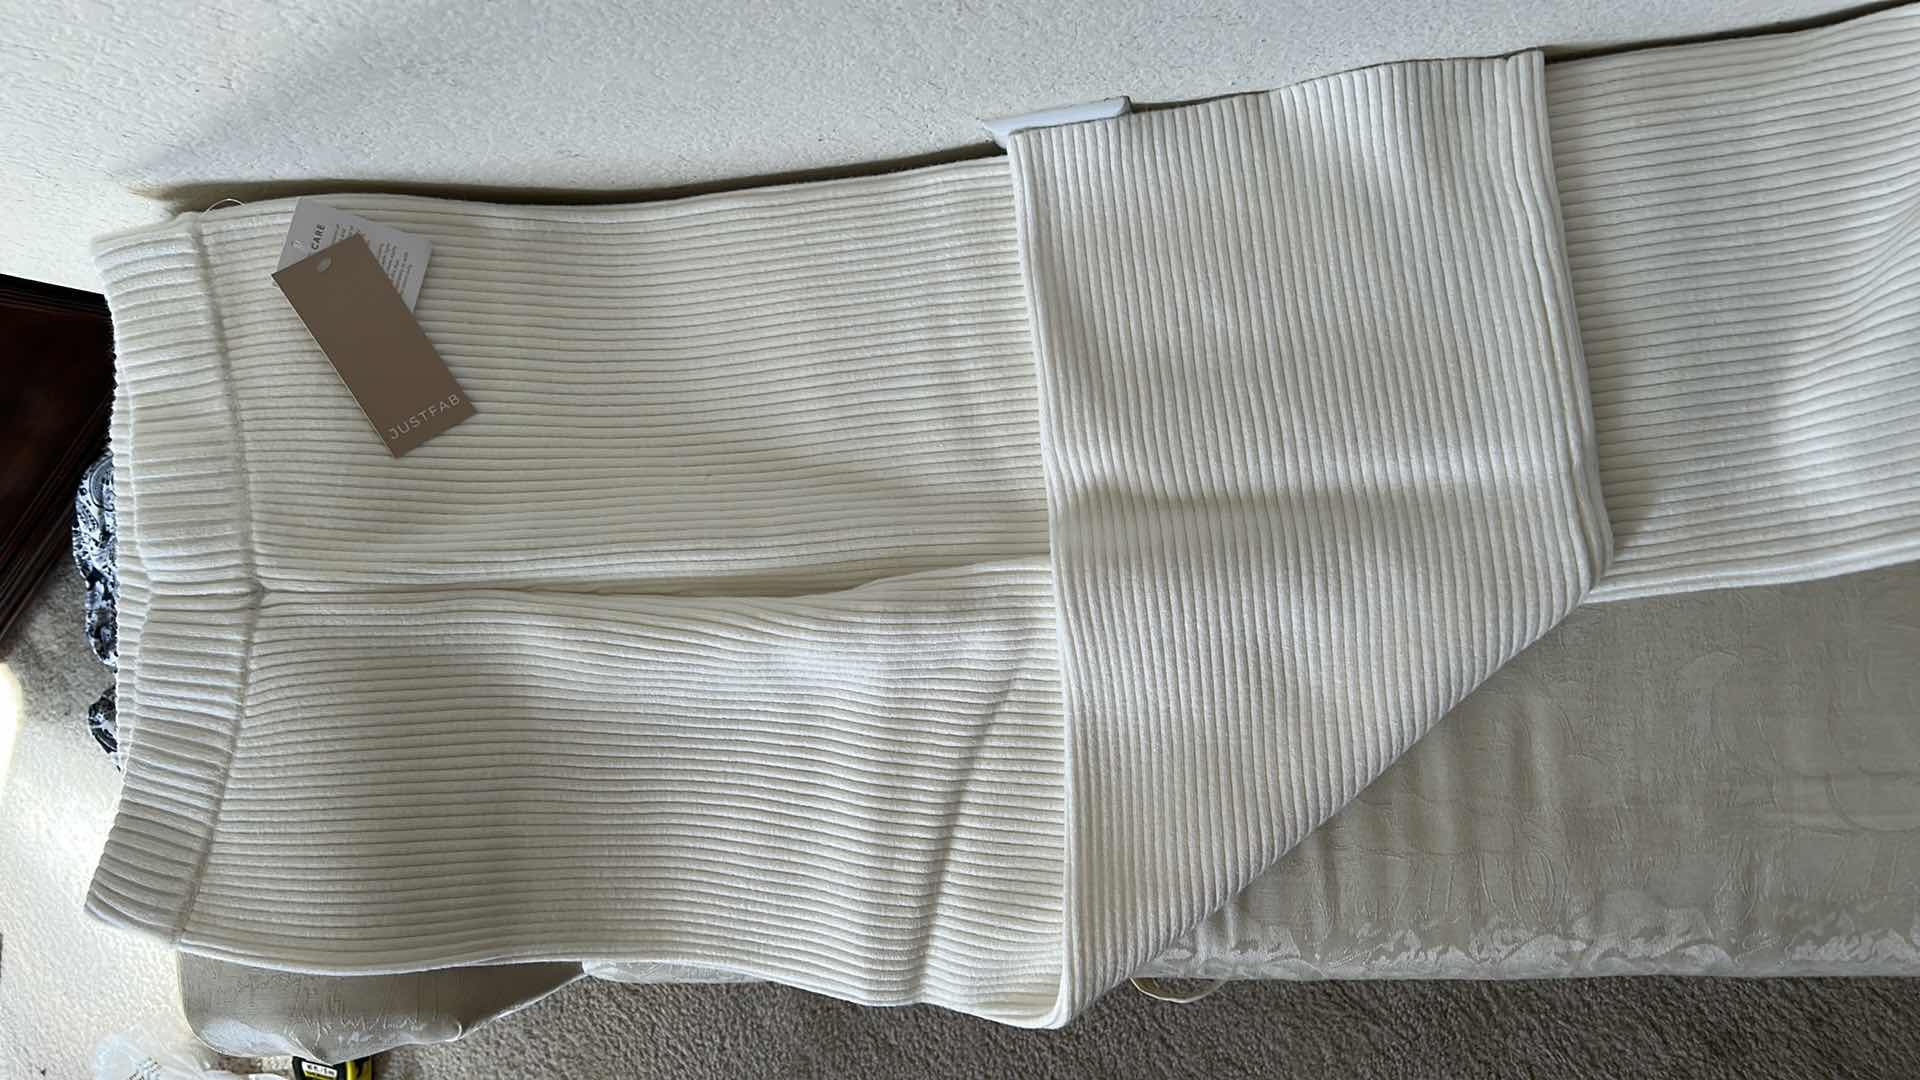 Photo 5 of NEW JUSTFAB ANKLE LENGTH RIBBED PANTS IN CREAM COLOR - SIZE M